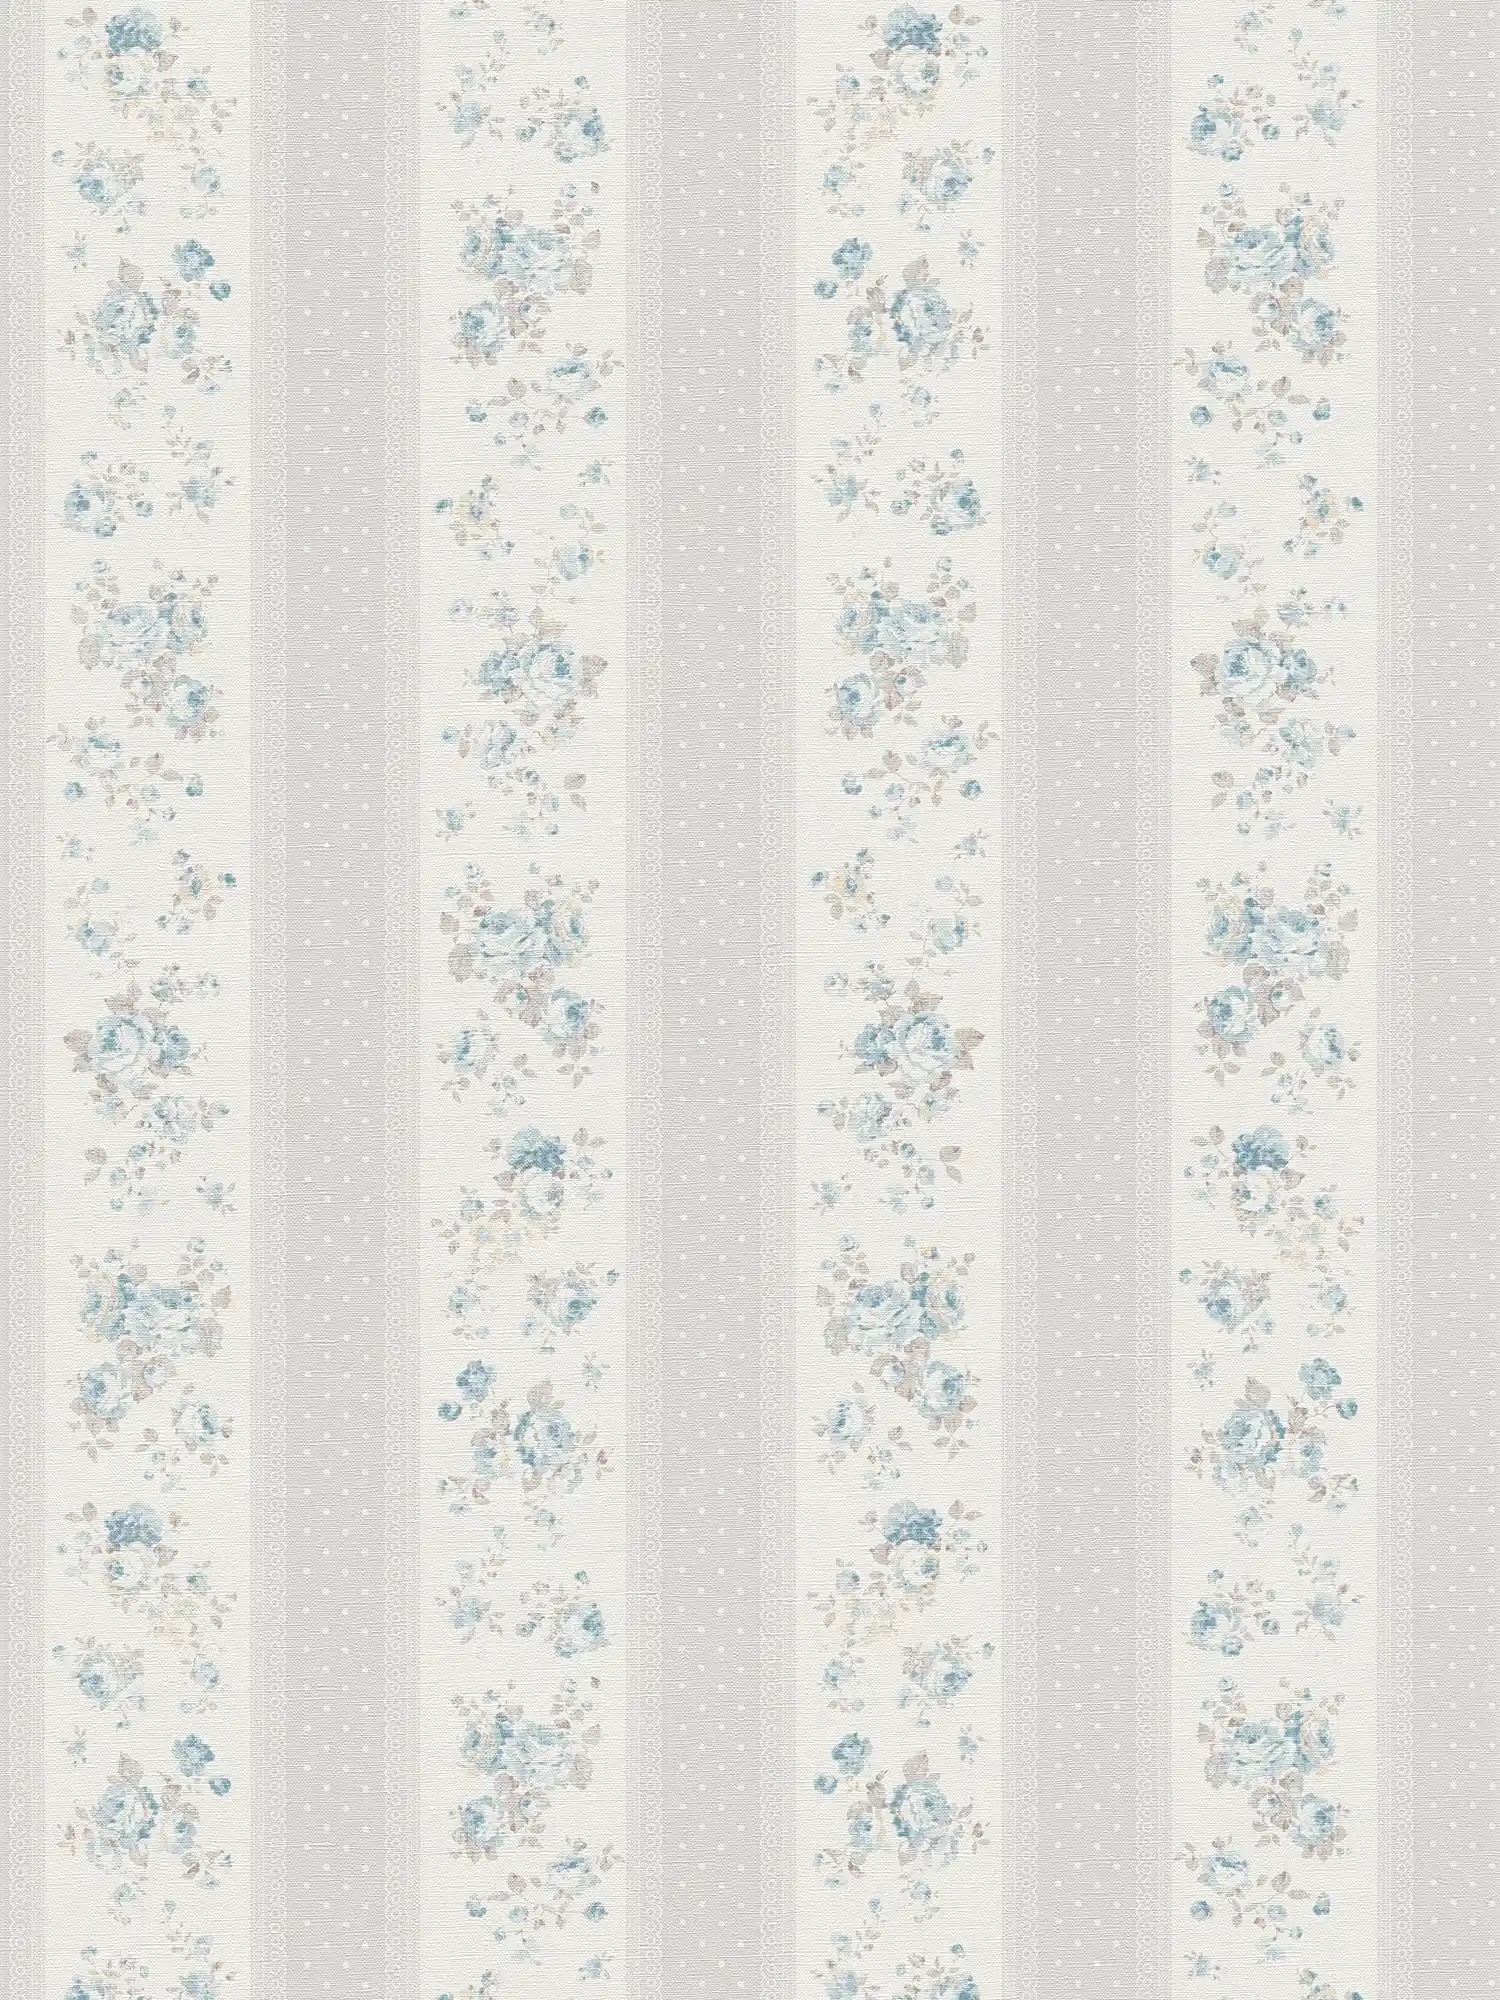 Non-woven wallpaper with dotted and floral stripes - grey, white, blue
